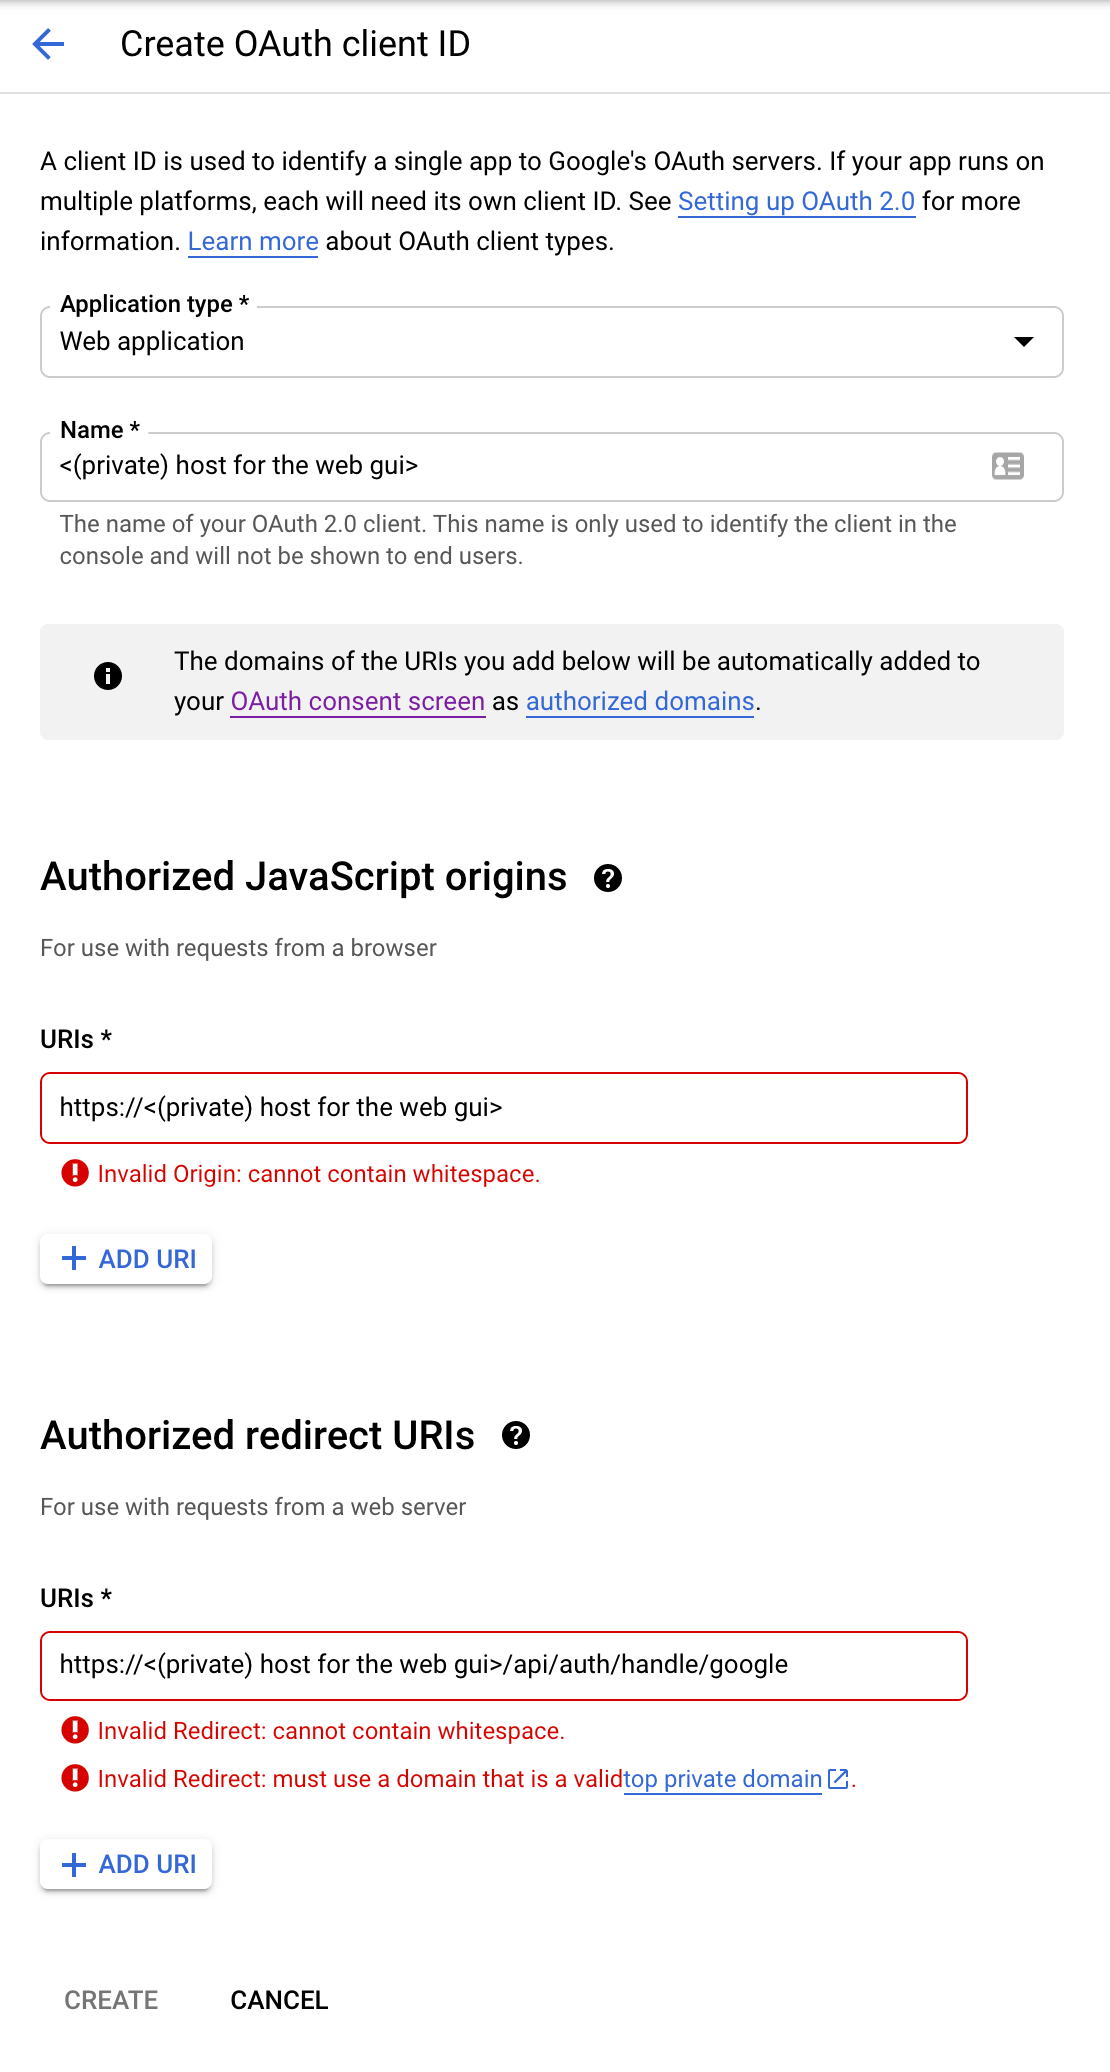 Register OAuth client ID